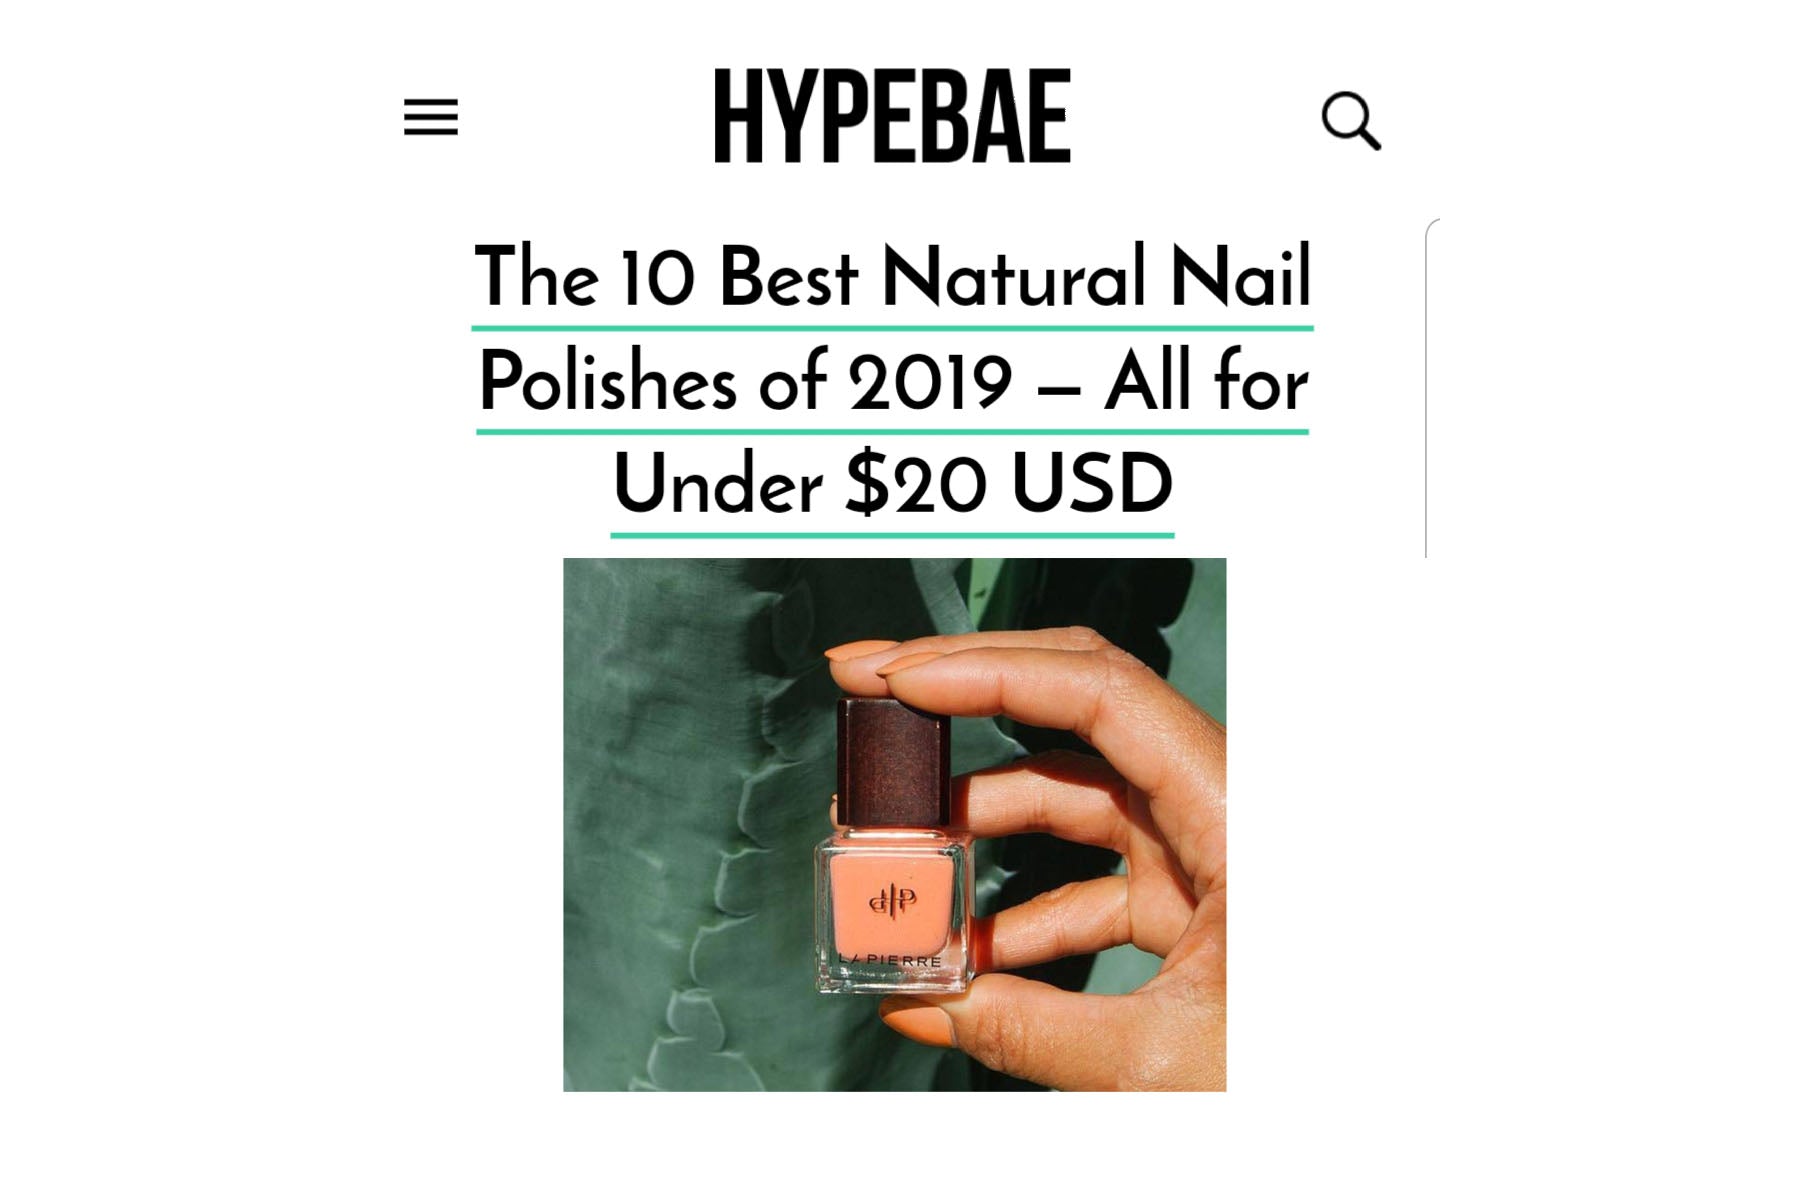 The 10 Best Natural Nail Polishes of 2019 — All for Under $20 USD